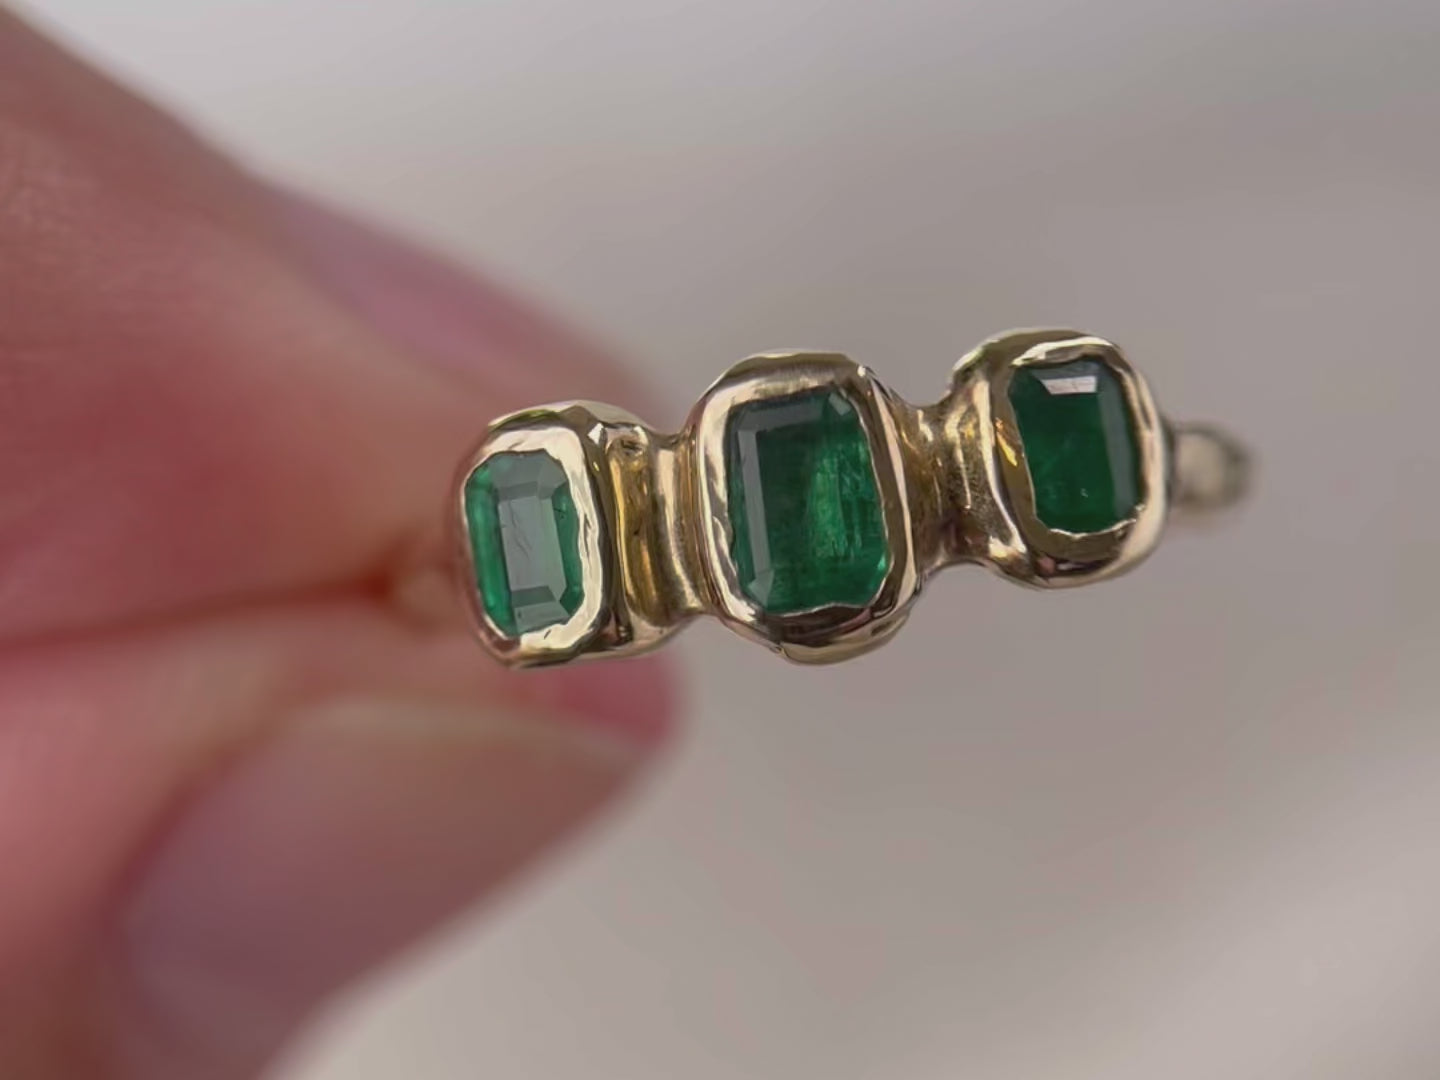 A close up video of  a ring with  three small emerald cut emeralds that are embedded into a 14k gold ring giving it an organic  and handcrafted look.